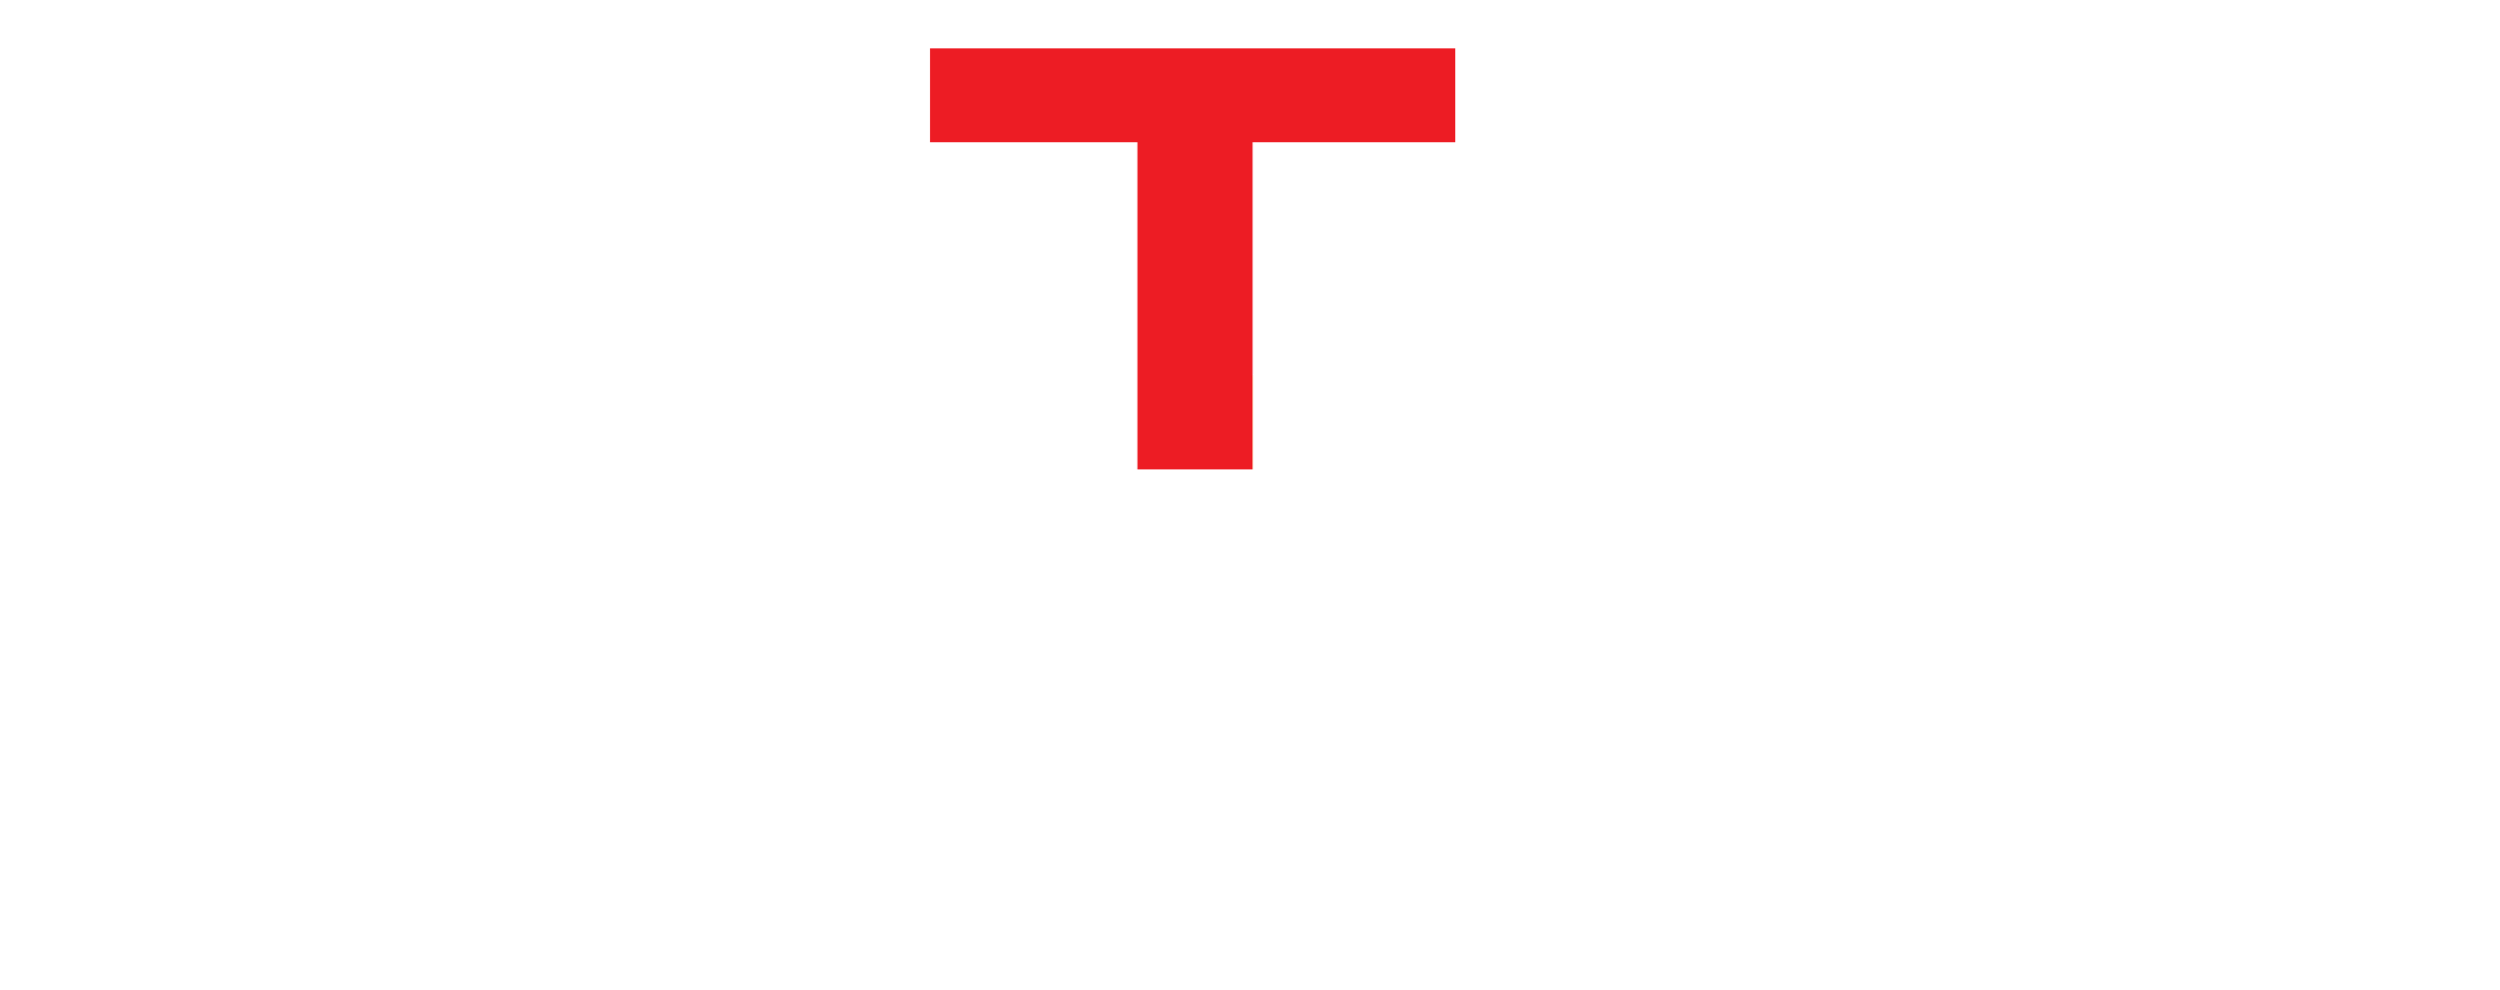 TJ Brothers Construction